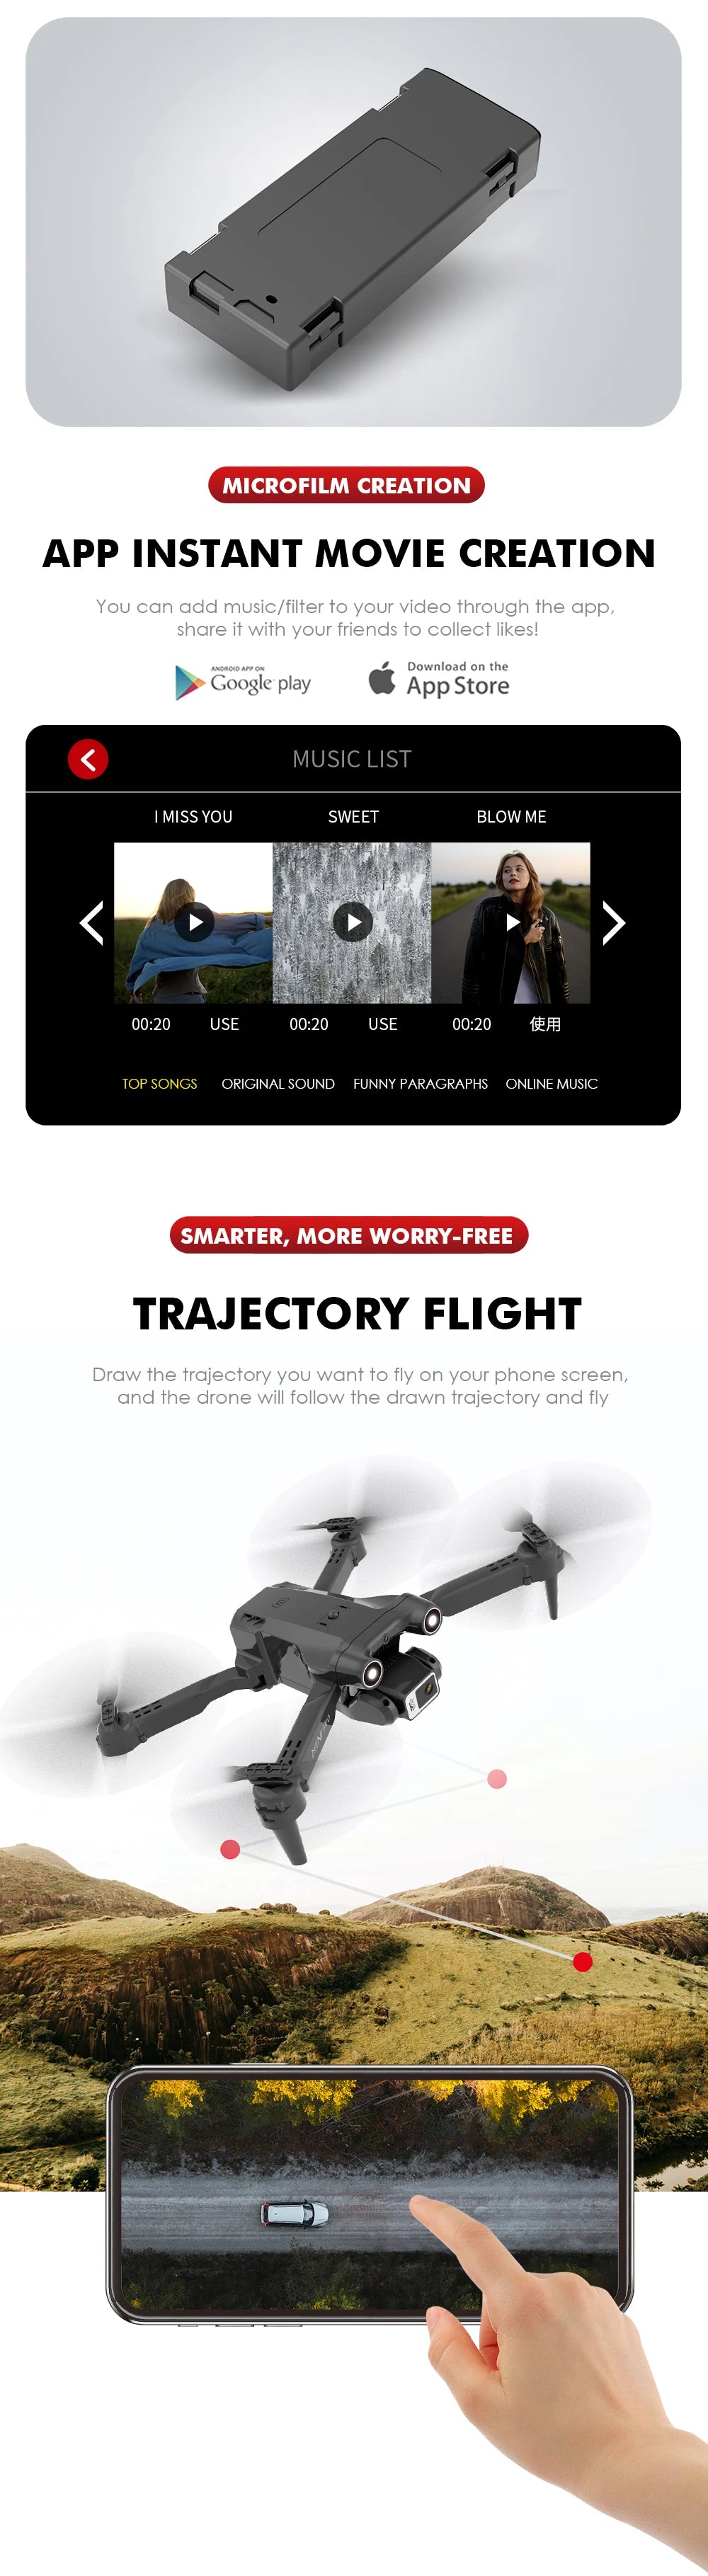 E63 Drone, microfilm creation app instant movie creation you can add music/filter to